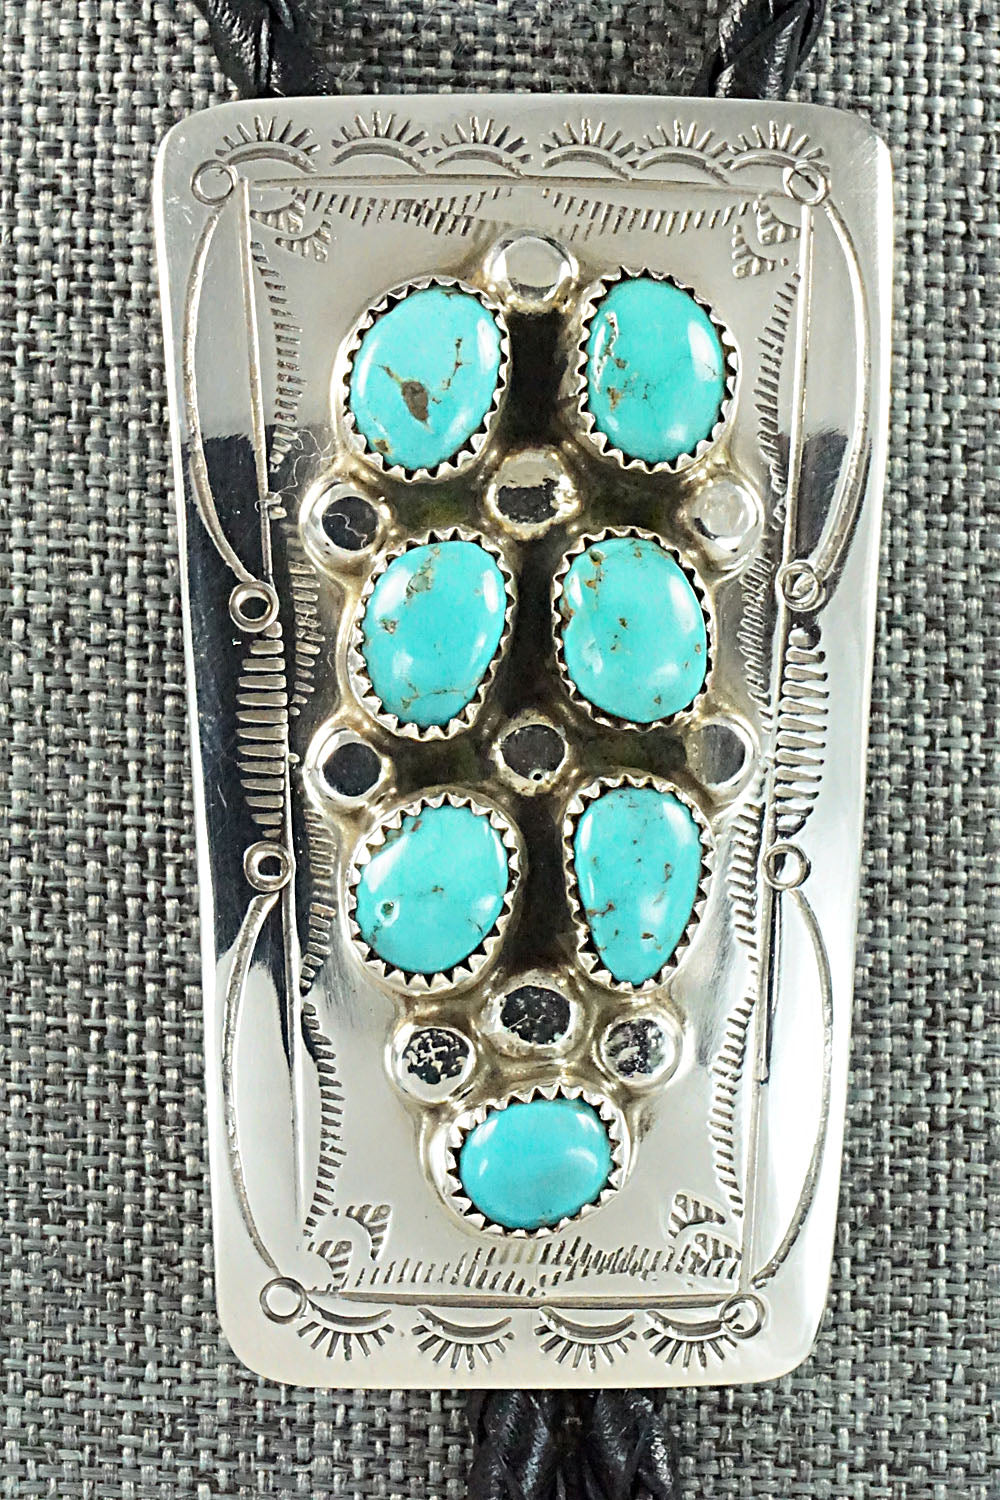 Turquoise & Sterling Silver Bolo Tie - Wilbur Myers